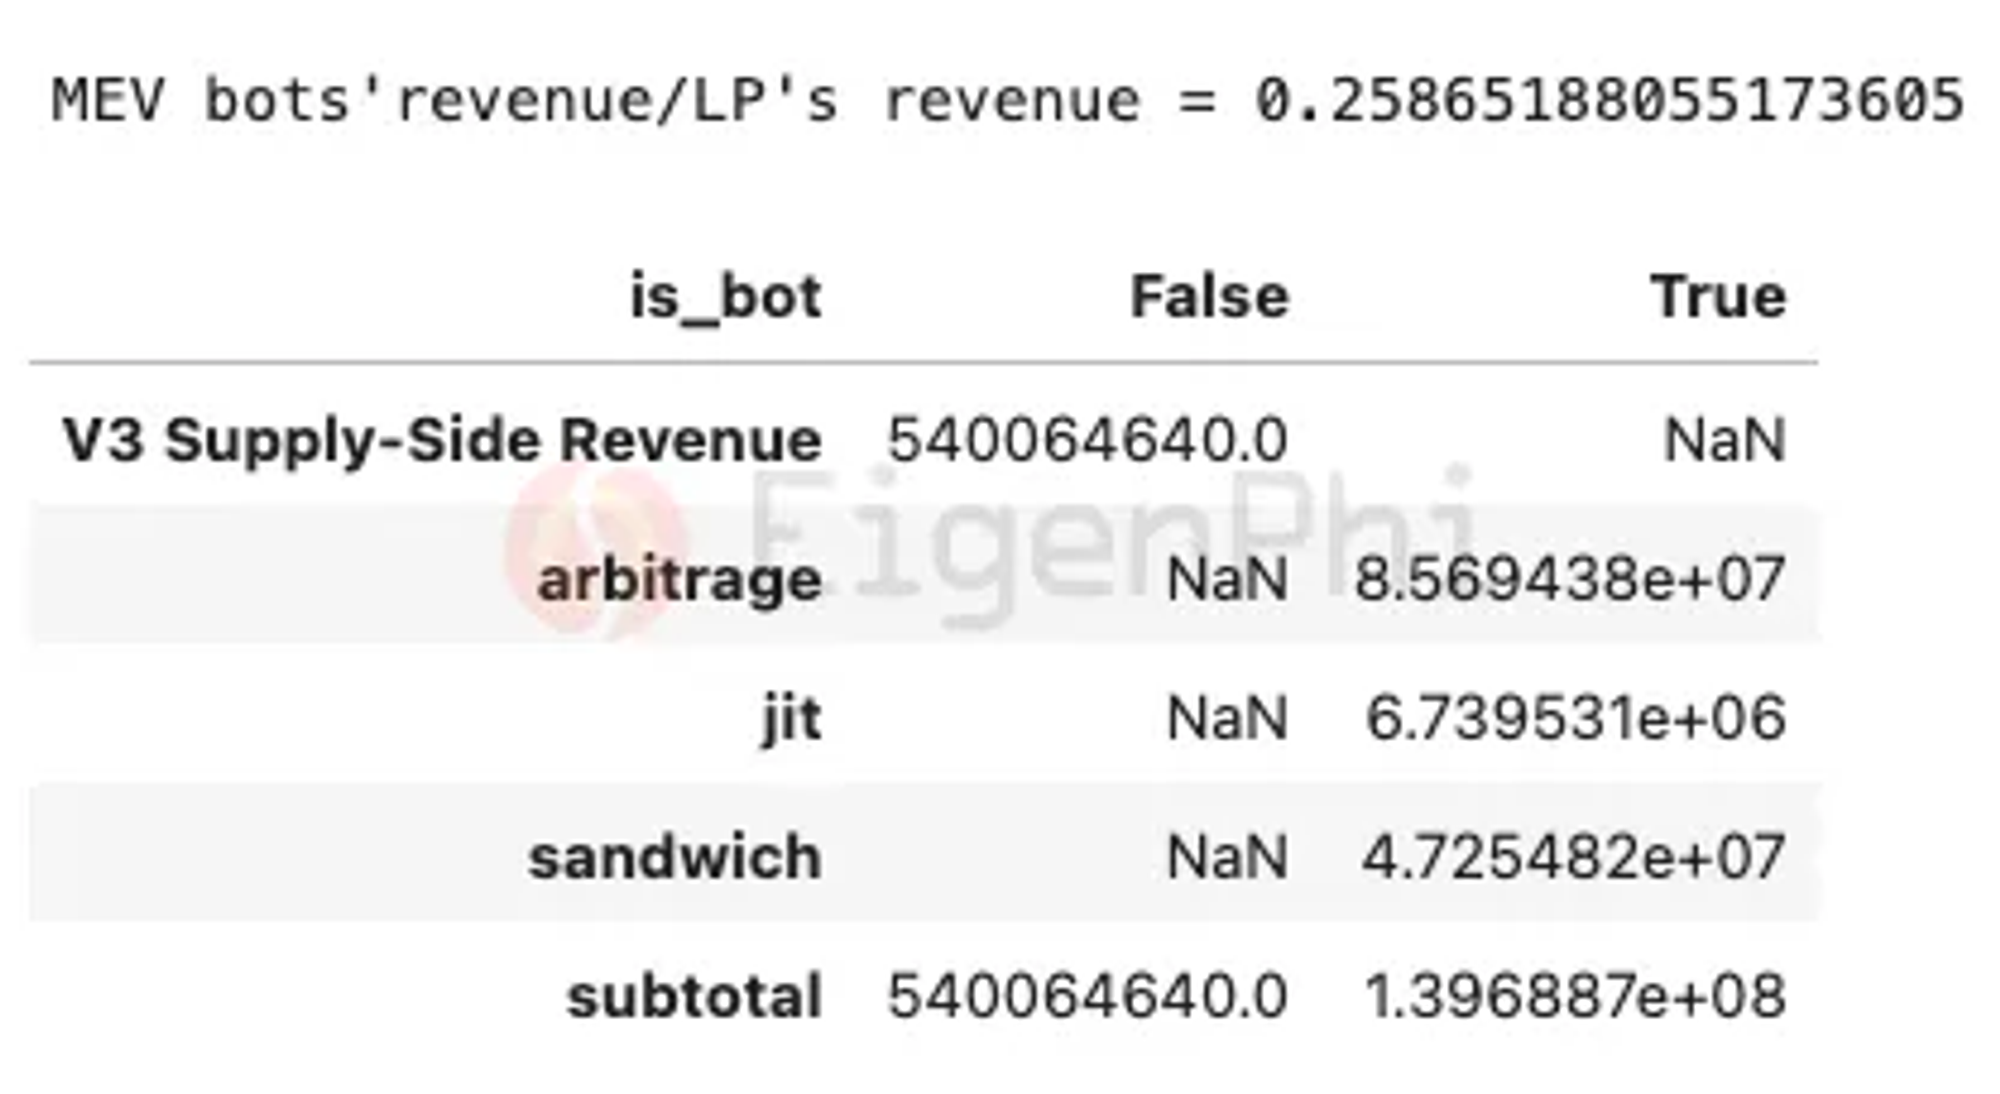 Profit from arbitrage, JIT, and sandwich attacks, and LP transaction fee income. Source: EigenPhi